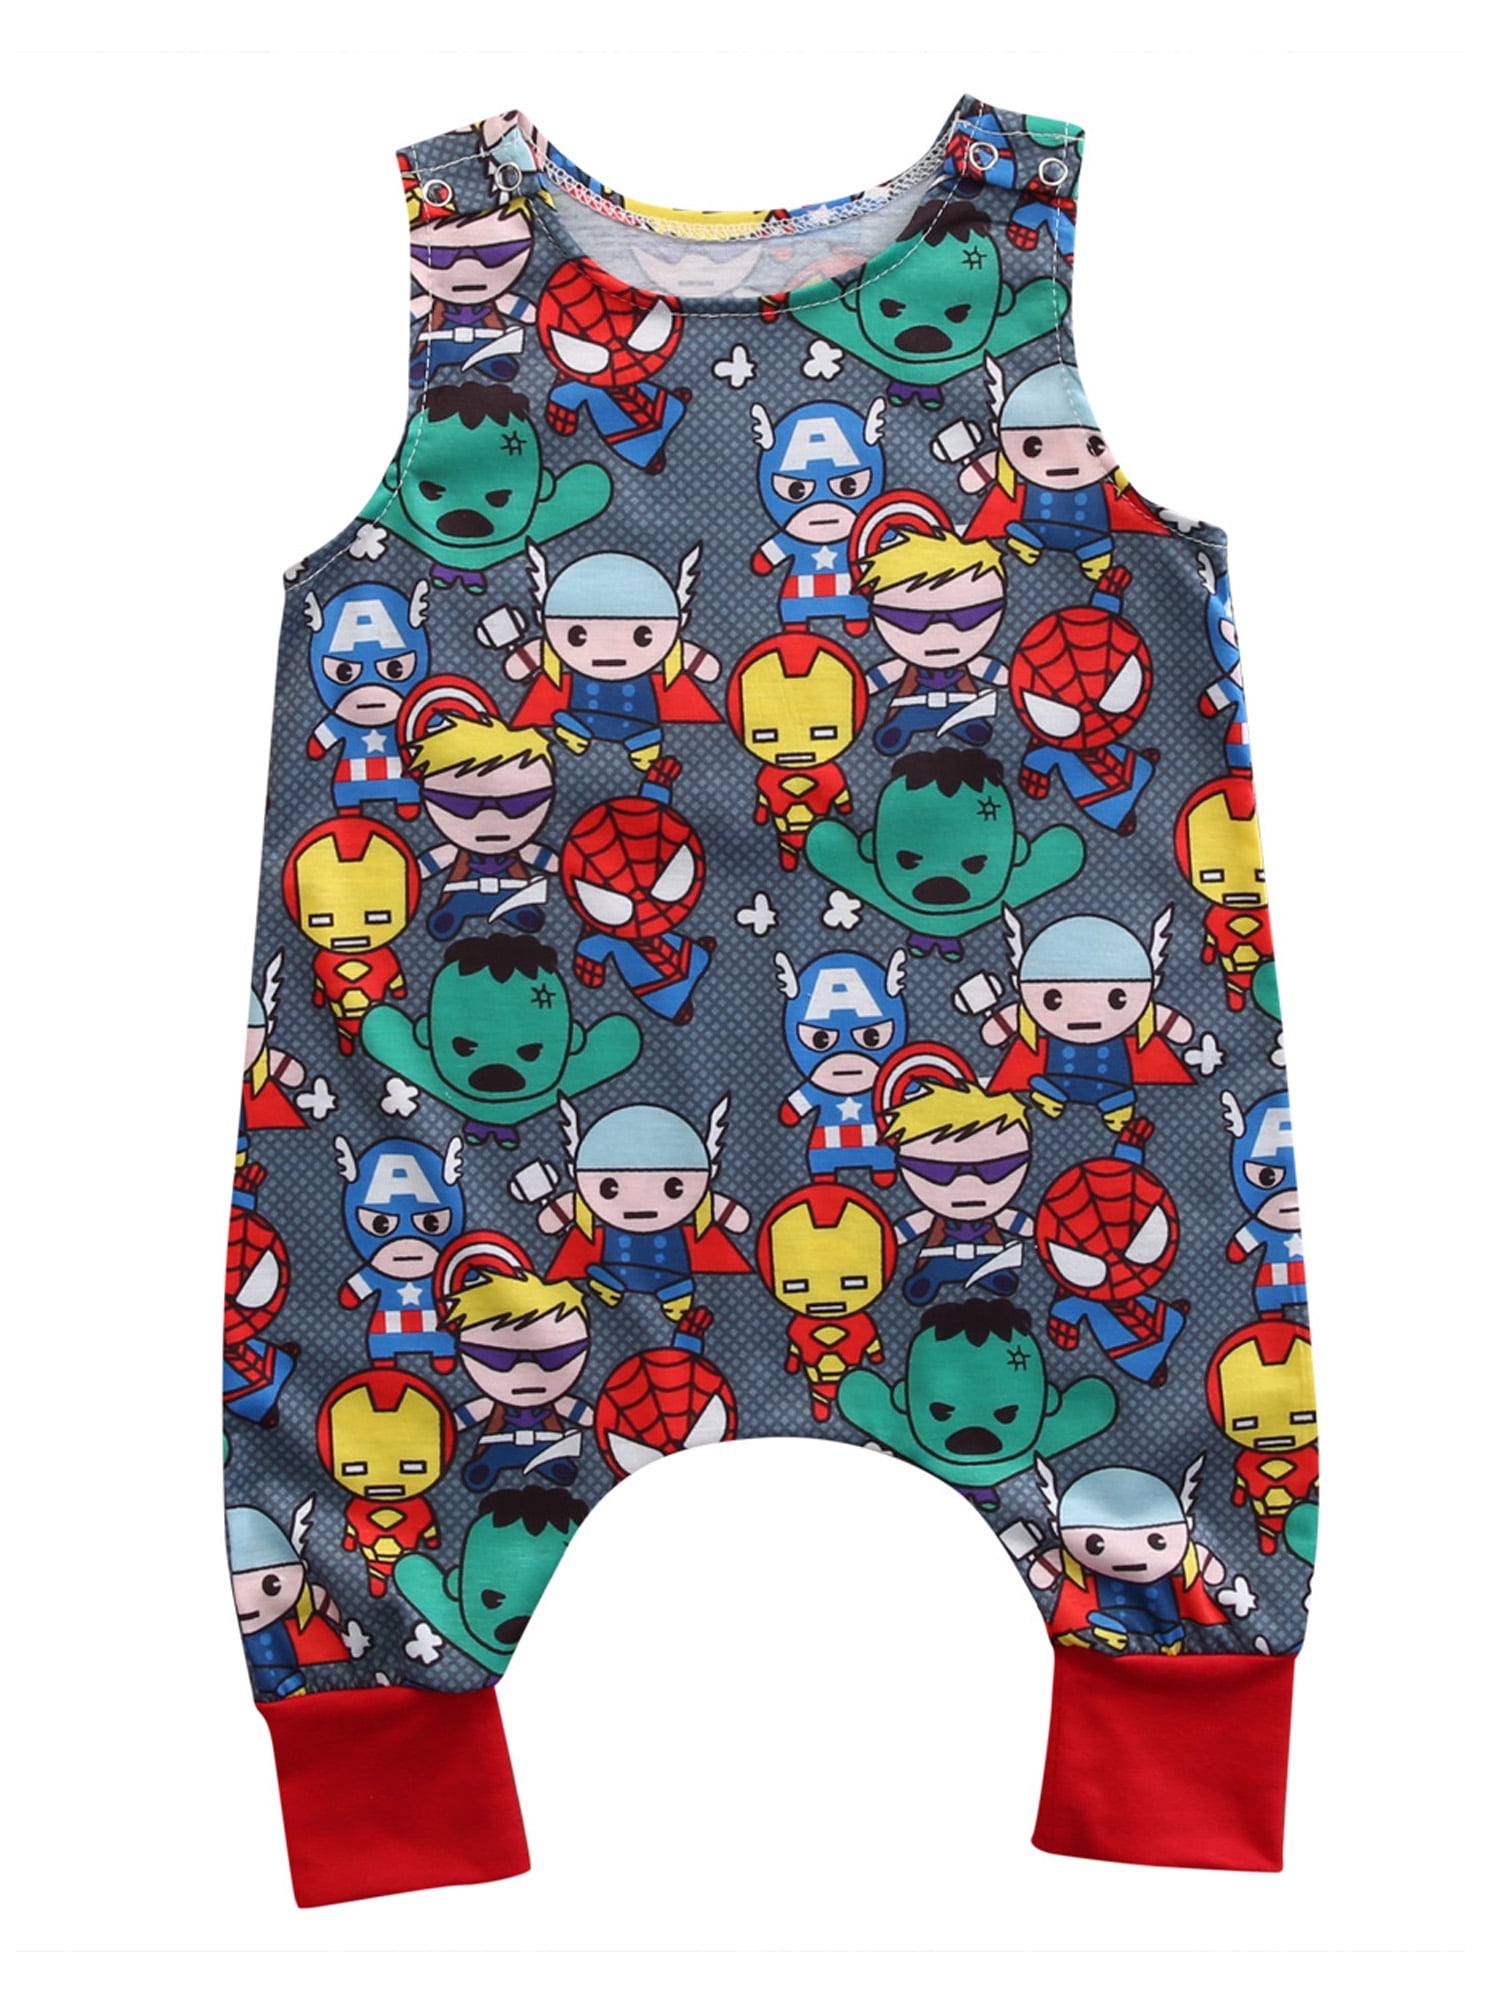 Newborn Infant Baby Girl Boy Cartoon Sleeveless Romper Jumpsuit Outfits Clothes